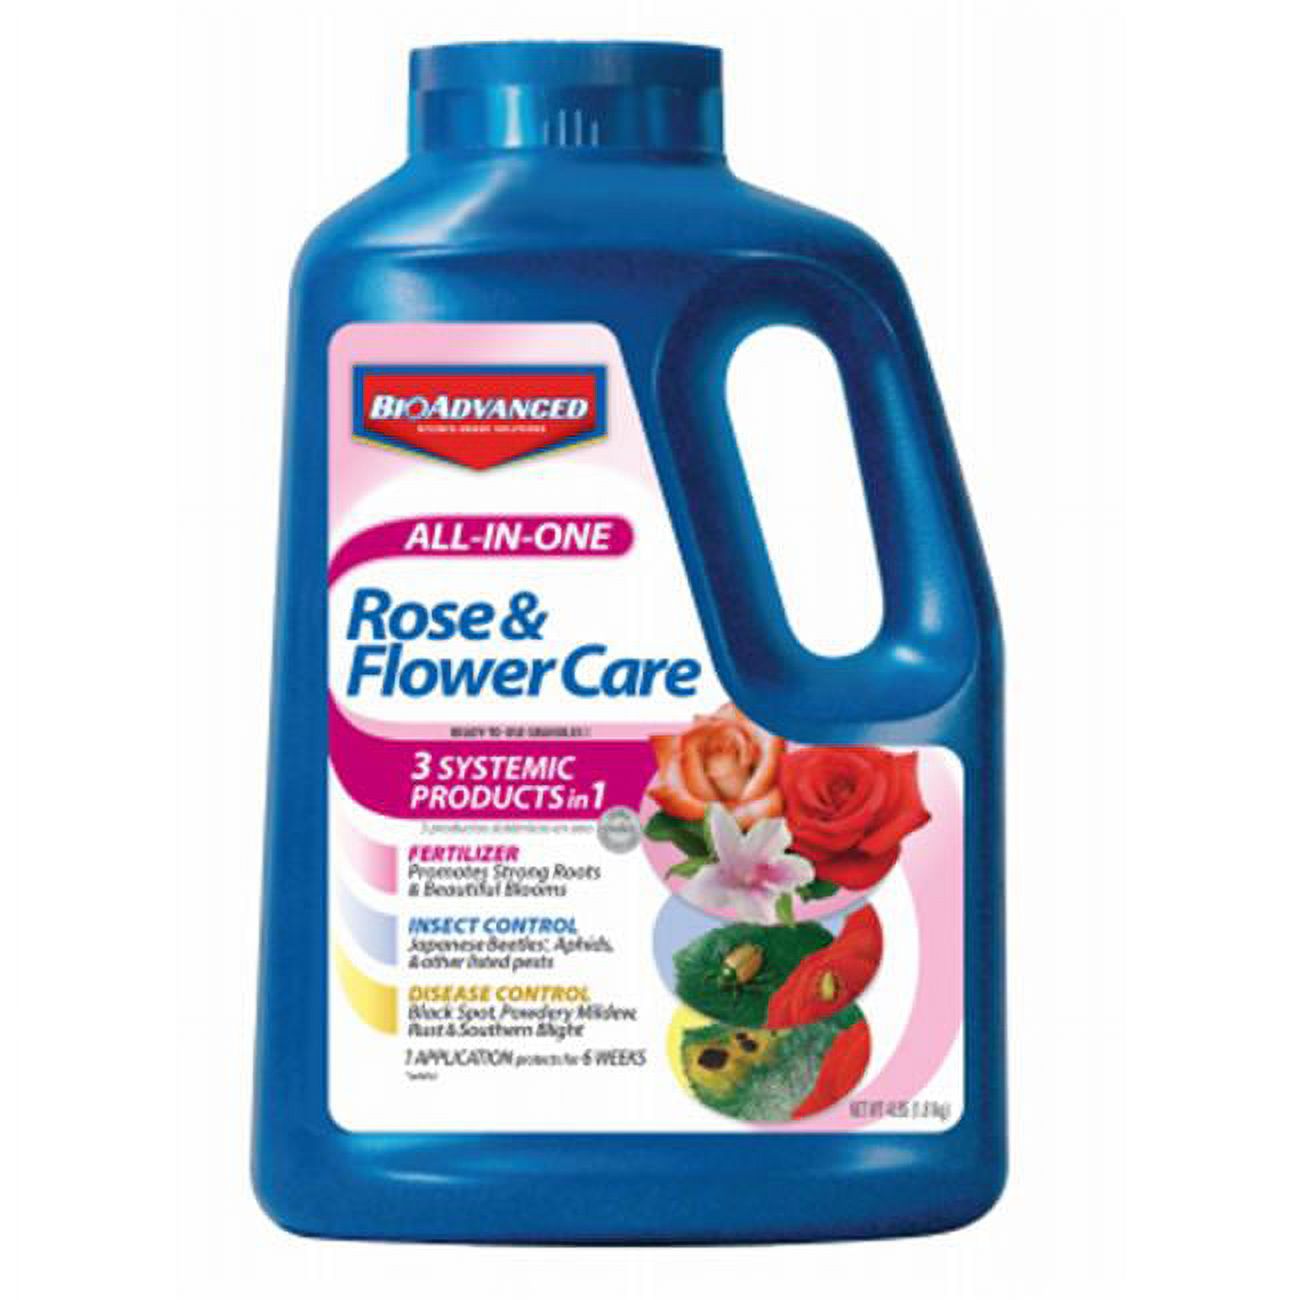 BioAdvanced All in One Rose & Flower Care 4lb Granule Fertilize and Protect - image 1 of 7